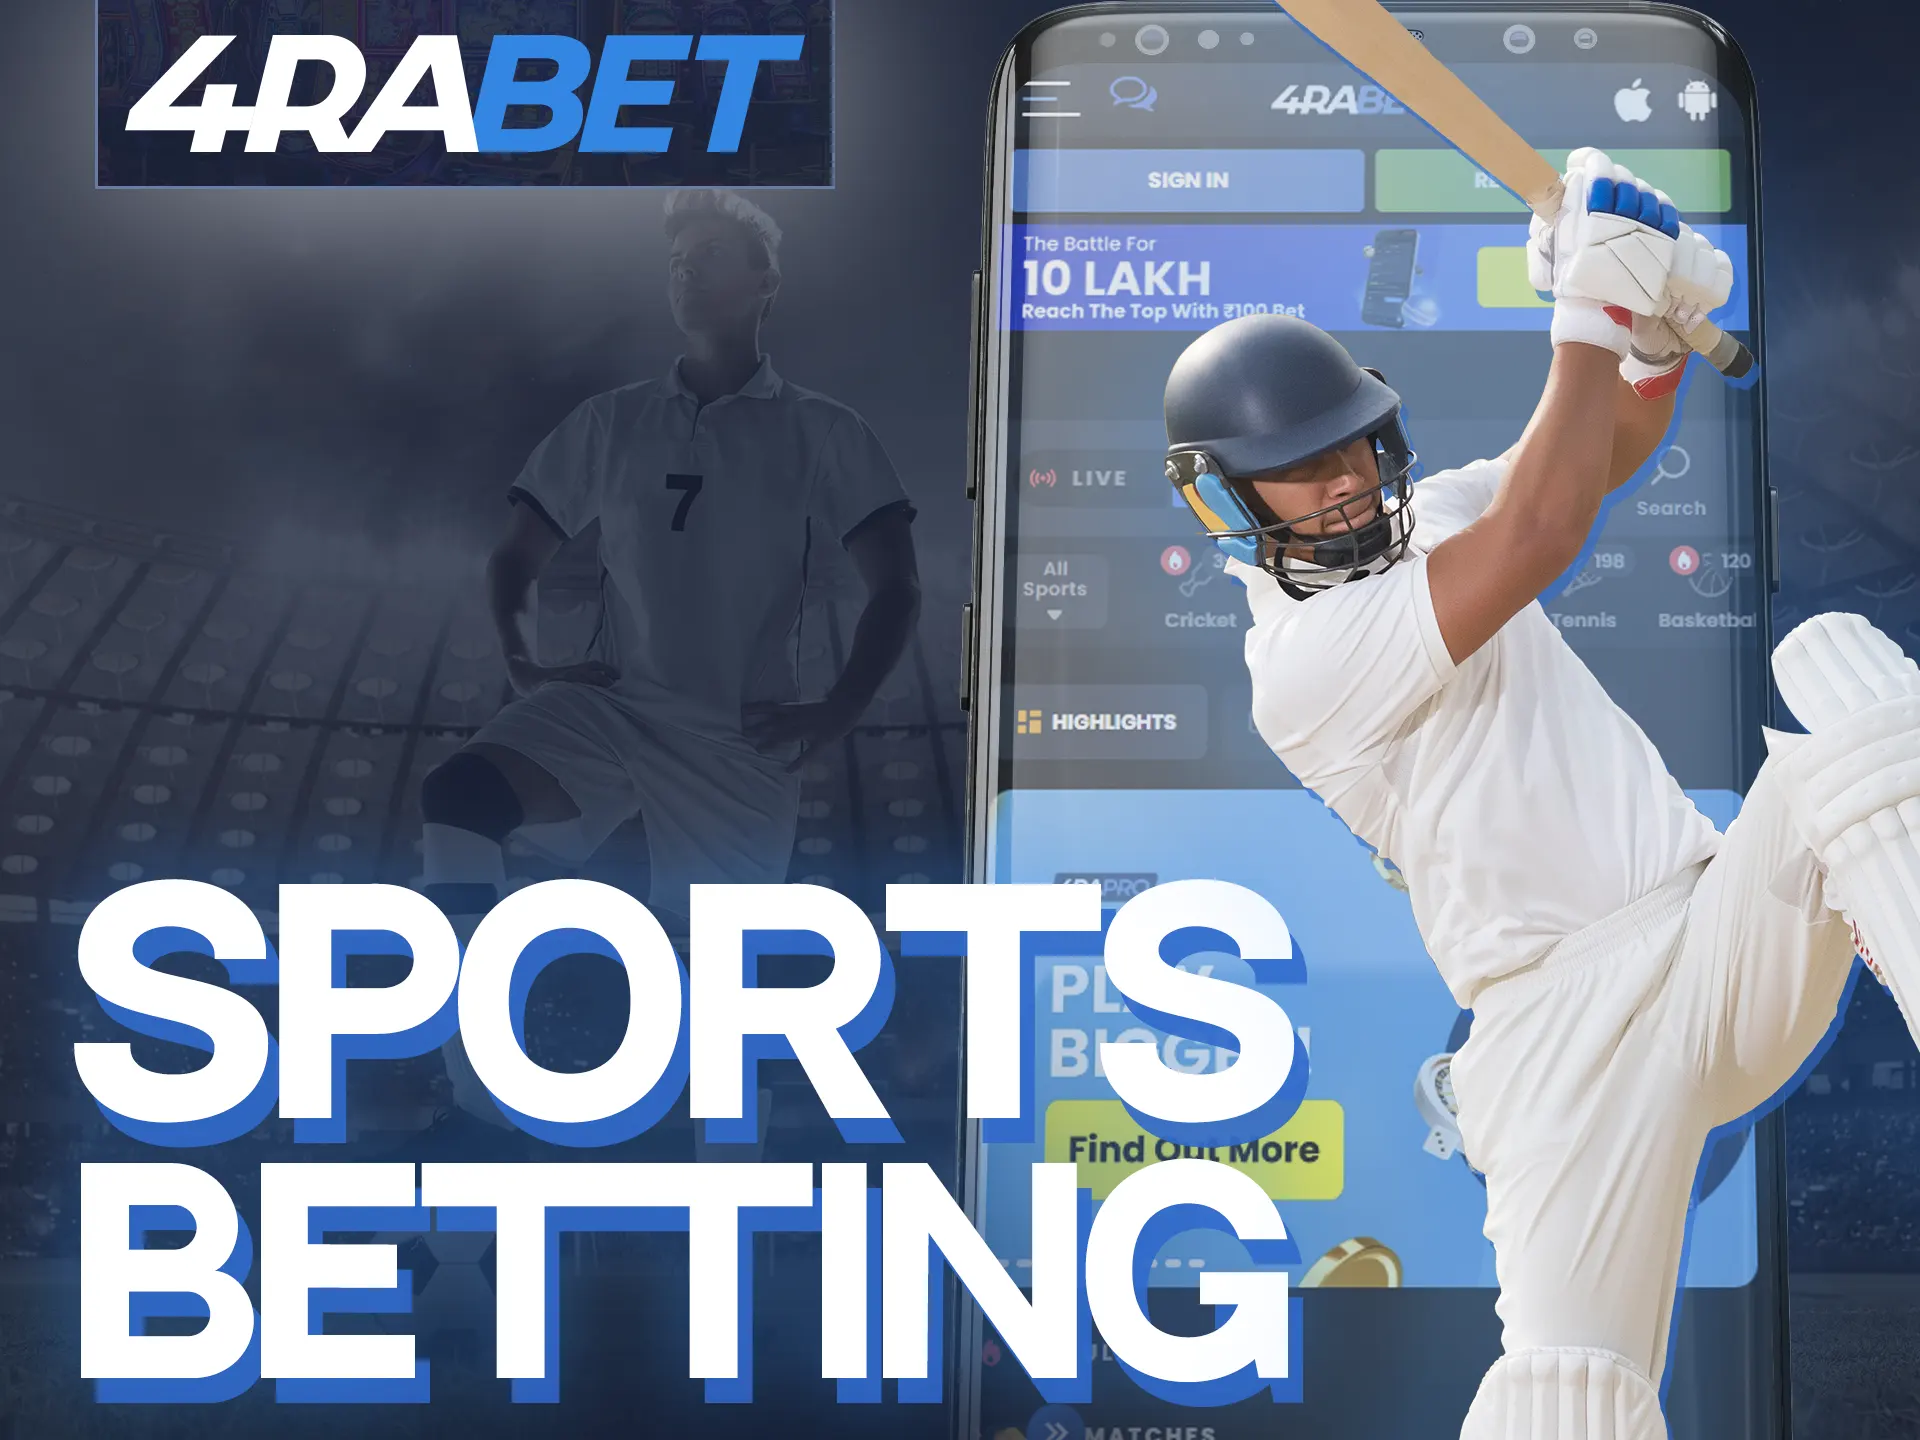 Place your bets on your favorite sporting events on the 4Rabet app.